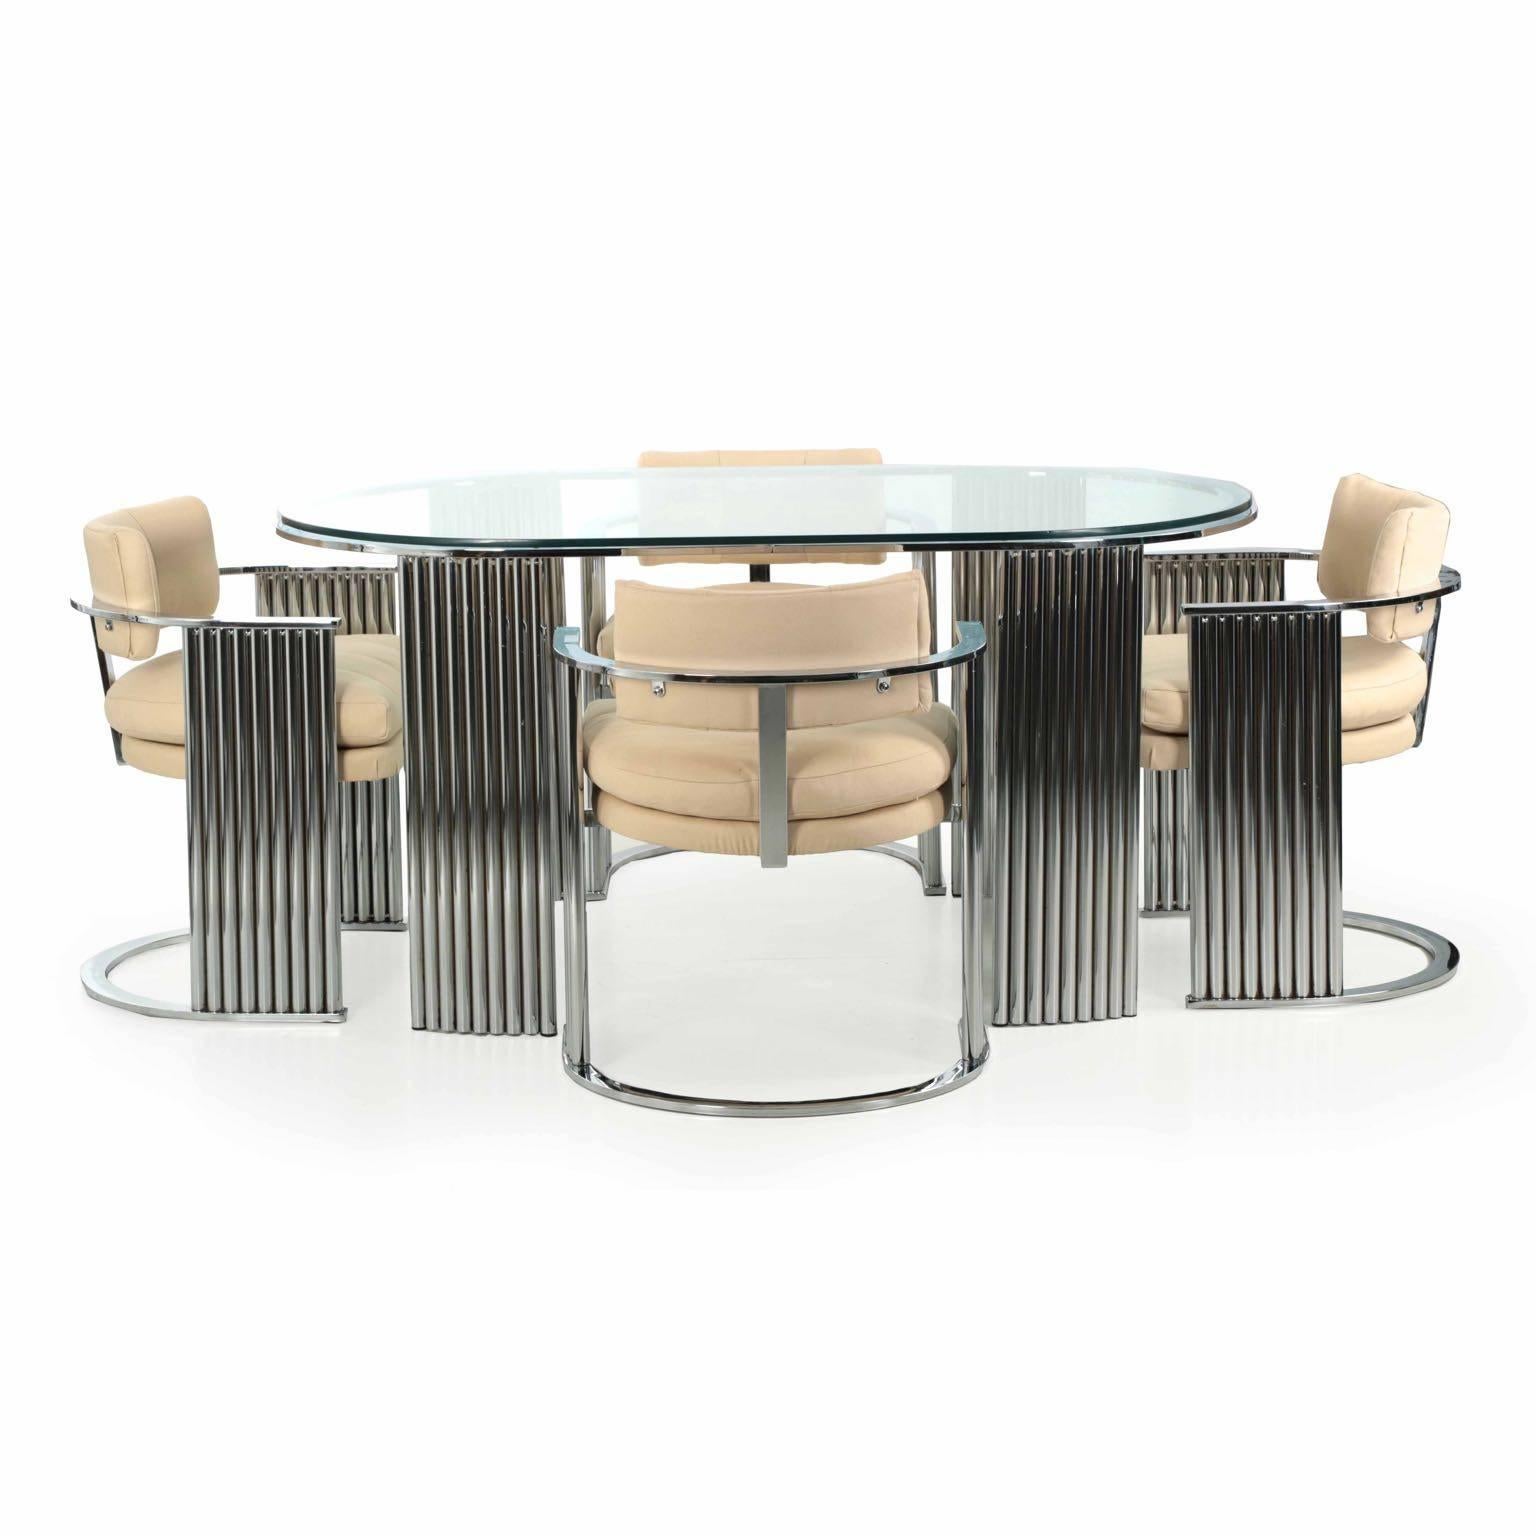 A rare and unusual dining set designed by Milo Baughman and manufactured by Thayer Coggin in High Point, NC during the third quarter of the 20th century, the form is closely reminiscent of the Art Deco period. High quality chromed steel shines